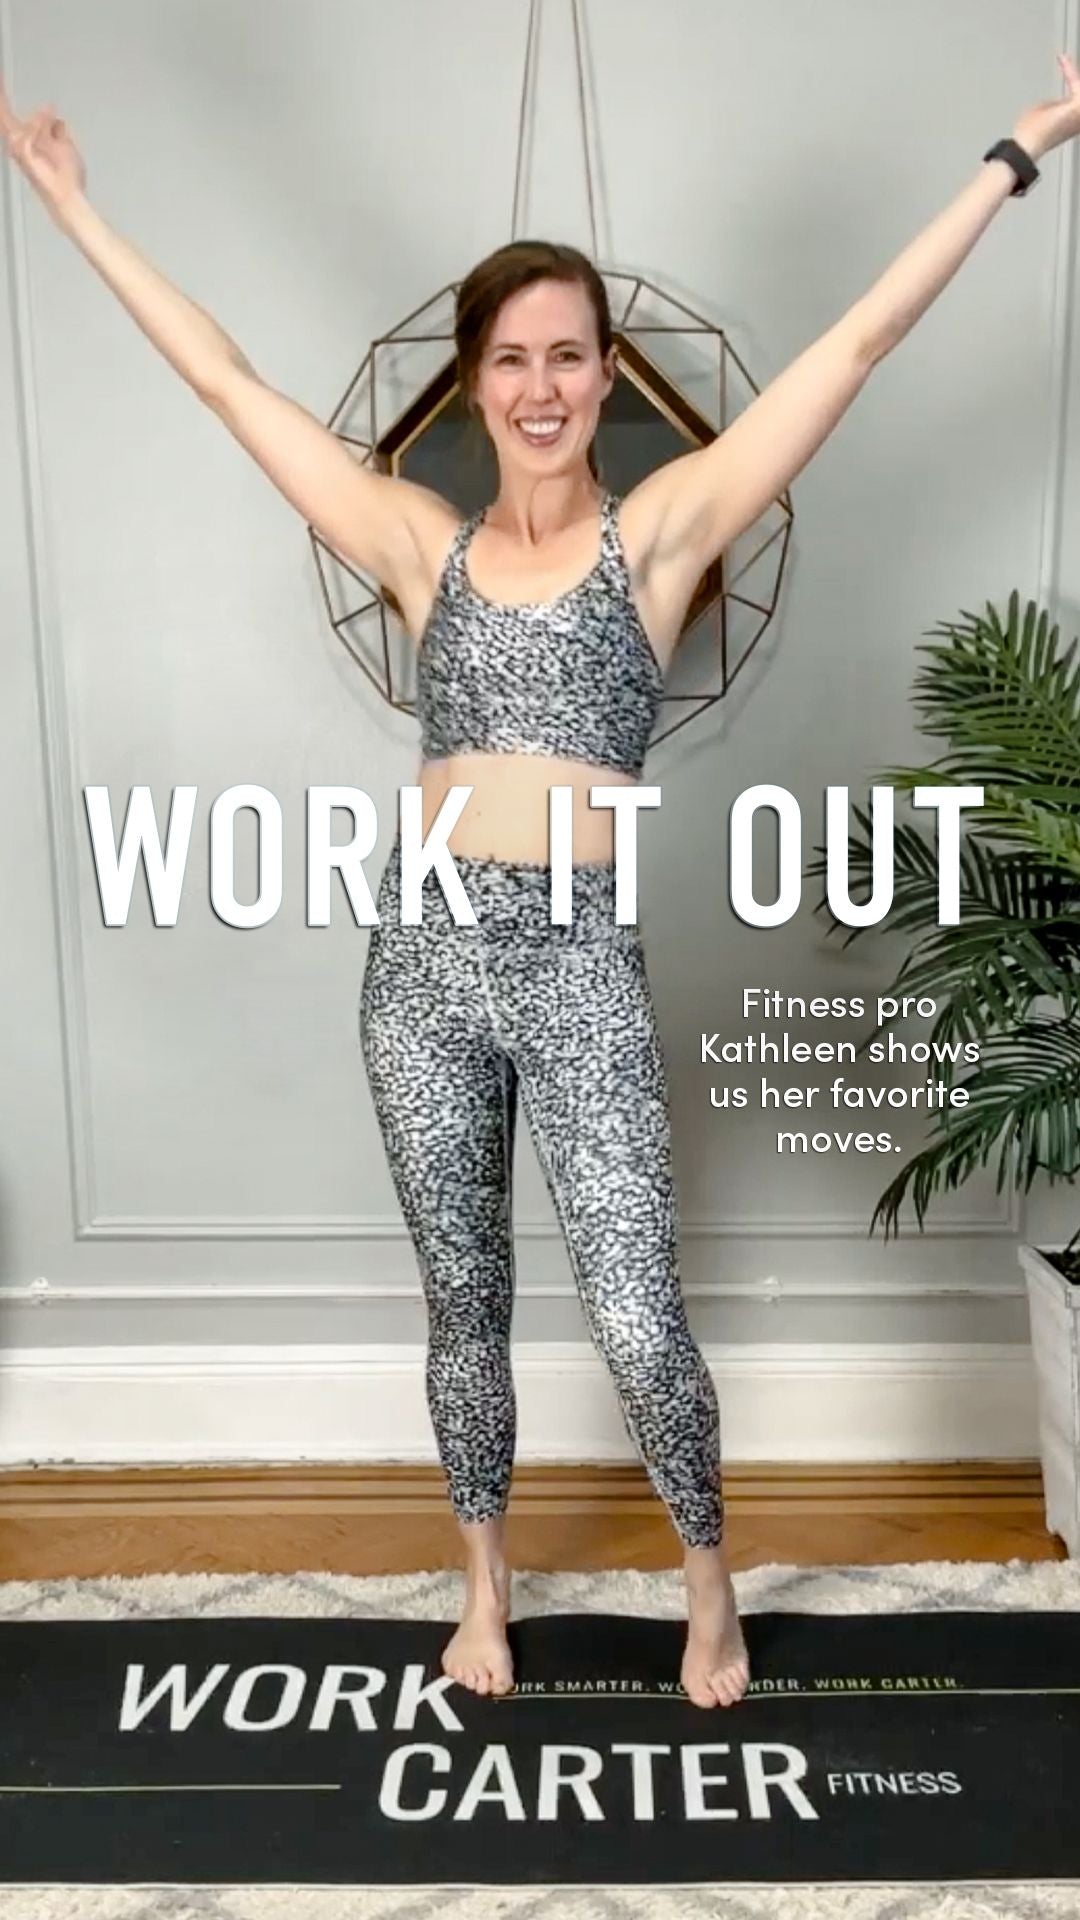 Working Out with Fitness Pro Kathleen